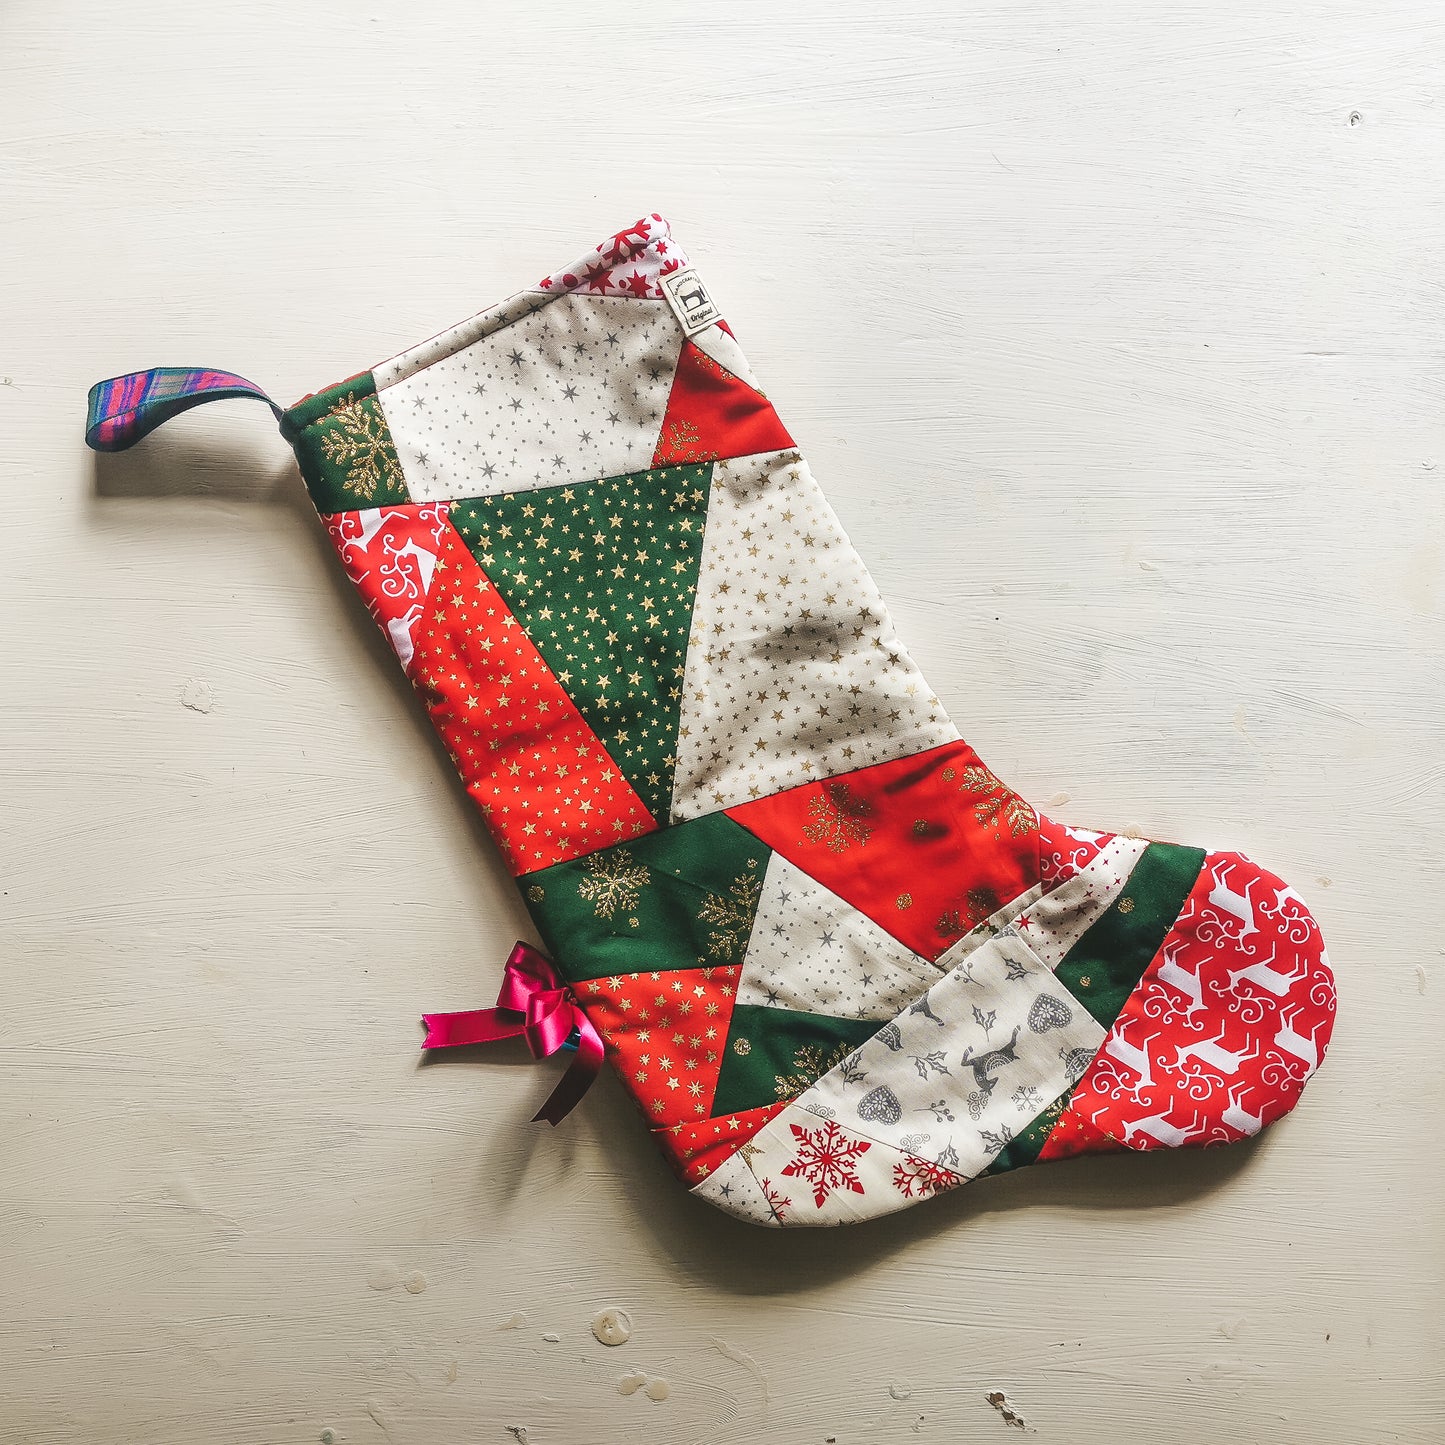 Patchwork Christmas Stocking Handmade by F&B in Yorkshire - Handmade Christmas Decorations